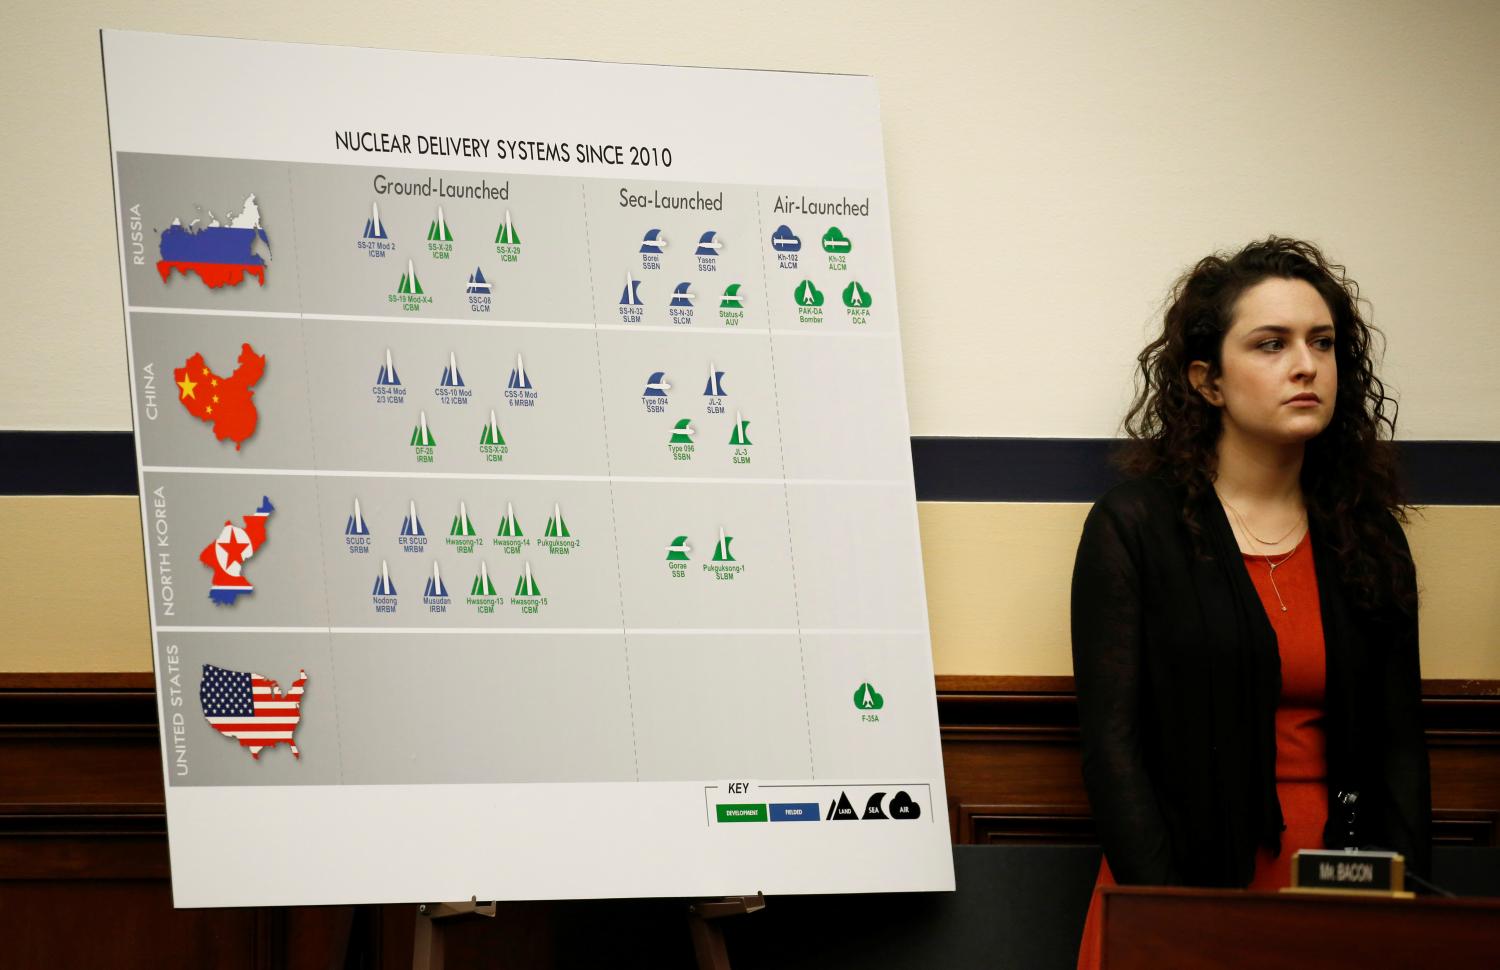 A Congressional aide stands by a chart showing the advancement of nuclear weapons programs in relation to the United States as U.S. Defense Secretary Jim Mattis testifies to the House Armed Services Committee on "The National Defense Strategy and the Nuclear Posture Review" on Capitol Hill in Washington, U.S., February 6, 2018. REUTERS/Joshua Roberts - RC1BD2C9DF00